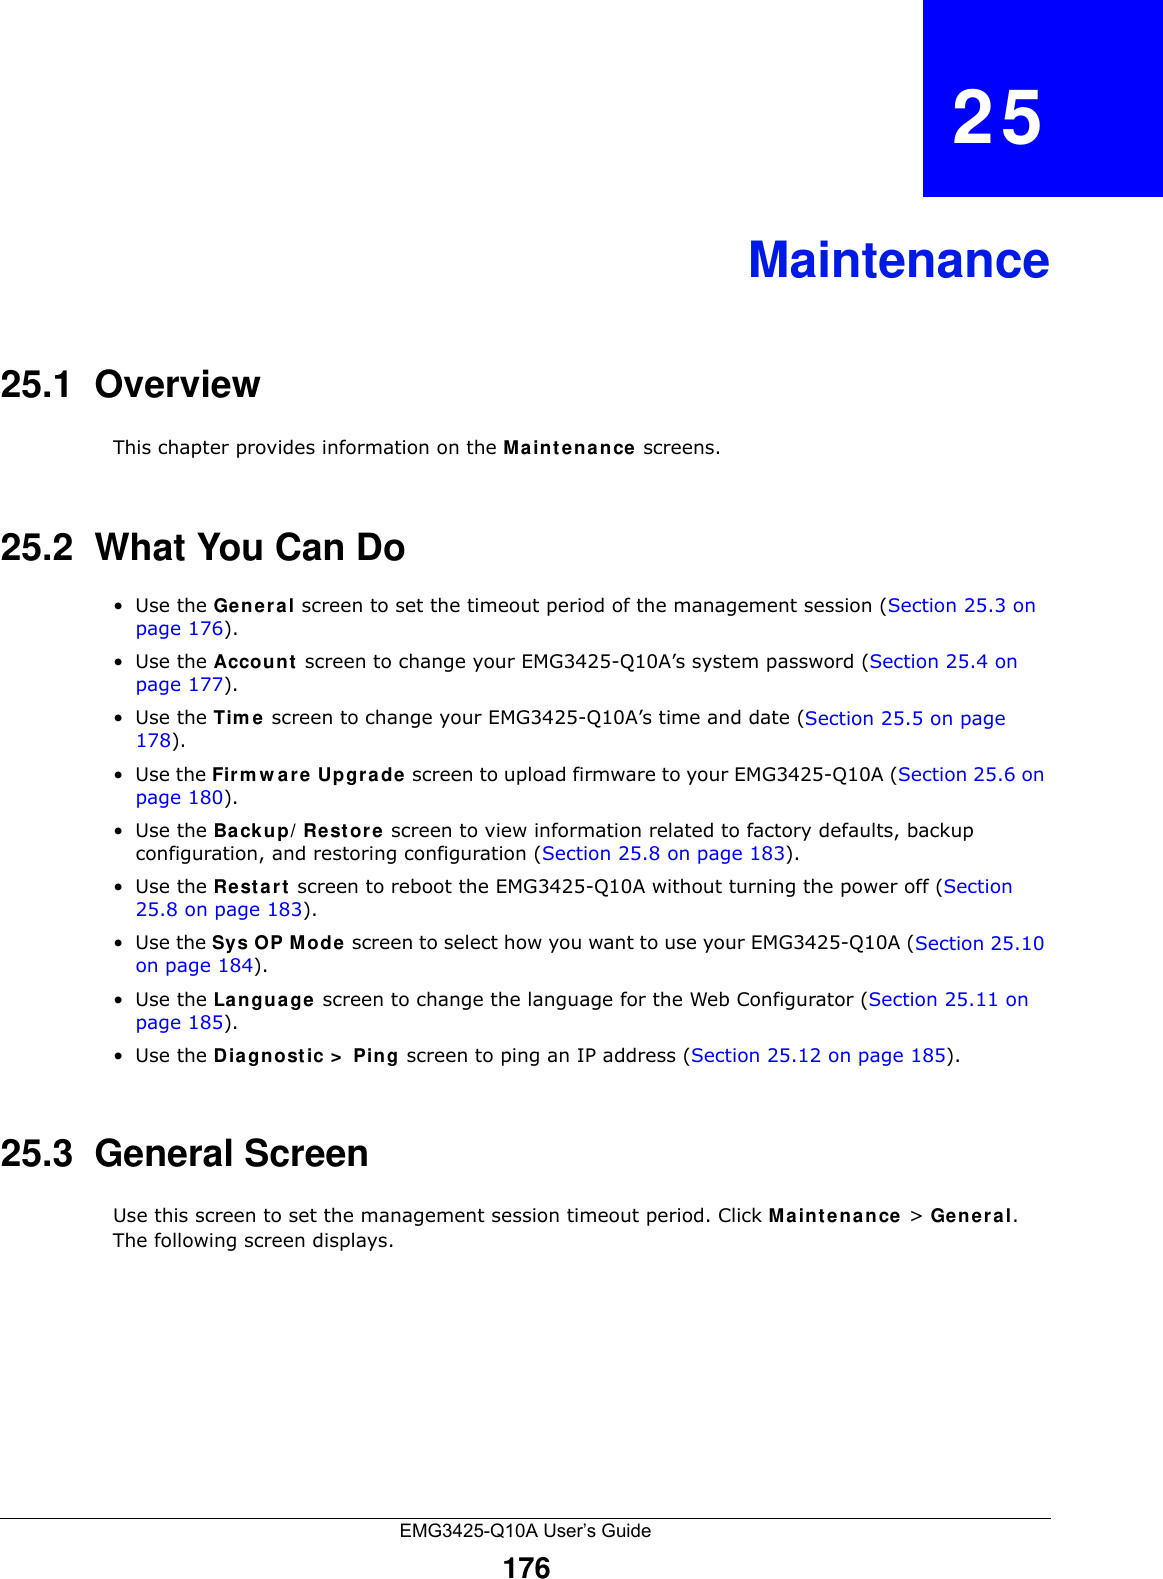 EMG3425-Q10A User’s Guide176CHAPTER   25Maintenance25.1  OverviewThis chapter provides information on the Main t e na n ce  screens. 25.2  What You Can Do•Use the Ge n e r a l screen to set the timeout period of the management session (Section 25.3 on page 176). •Use the Account  screen to change your EMG3425-Q10A’s system password (Section 25.4 on page 177).•Use the Tim e  screen to change your EMG3425-Q10A’s time and date (Section 25.5 on page 178).•Use the Firm w are Upgr a de screen to upload firmware to your EMG3425-Q10A (Section 25.6 on page 180).•Use the Backup/ Restore screen to view information related to factory defaults, backup configuration, and restoring configuration (Section 25.8 on page 183).•Use the Restart  screen to reboot the EMG3425-Q10A without turning the power off (Section 25.8 on page 183).•Use the Sys OP M ode screen to select how you want to use your EMG3425-Q10A (Section 25.10 on page 184). •Use the La n guage screen to change the language for the Web Configurator (Section 25.11 on page 185).•Use the Dia gnost ic &gt;  Ping screen to ping an IP address (Section 25.12 on page 185). 25.3  General Screen Use this screen to set the management session timeout period. Click M a int e na n ce  &gt; General. The following screen displays.